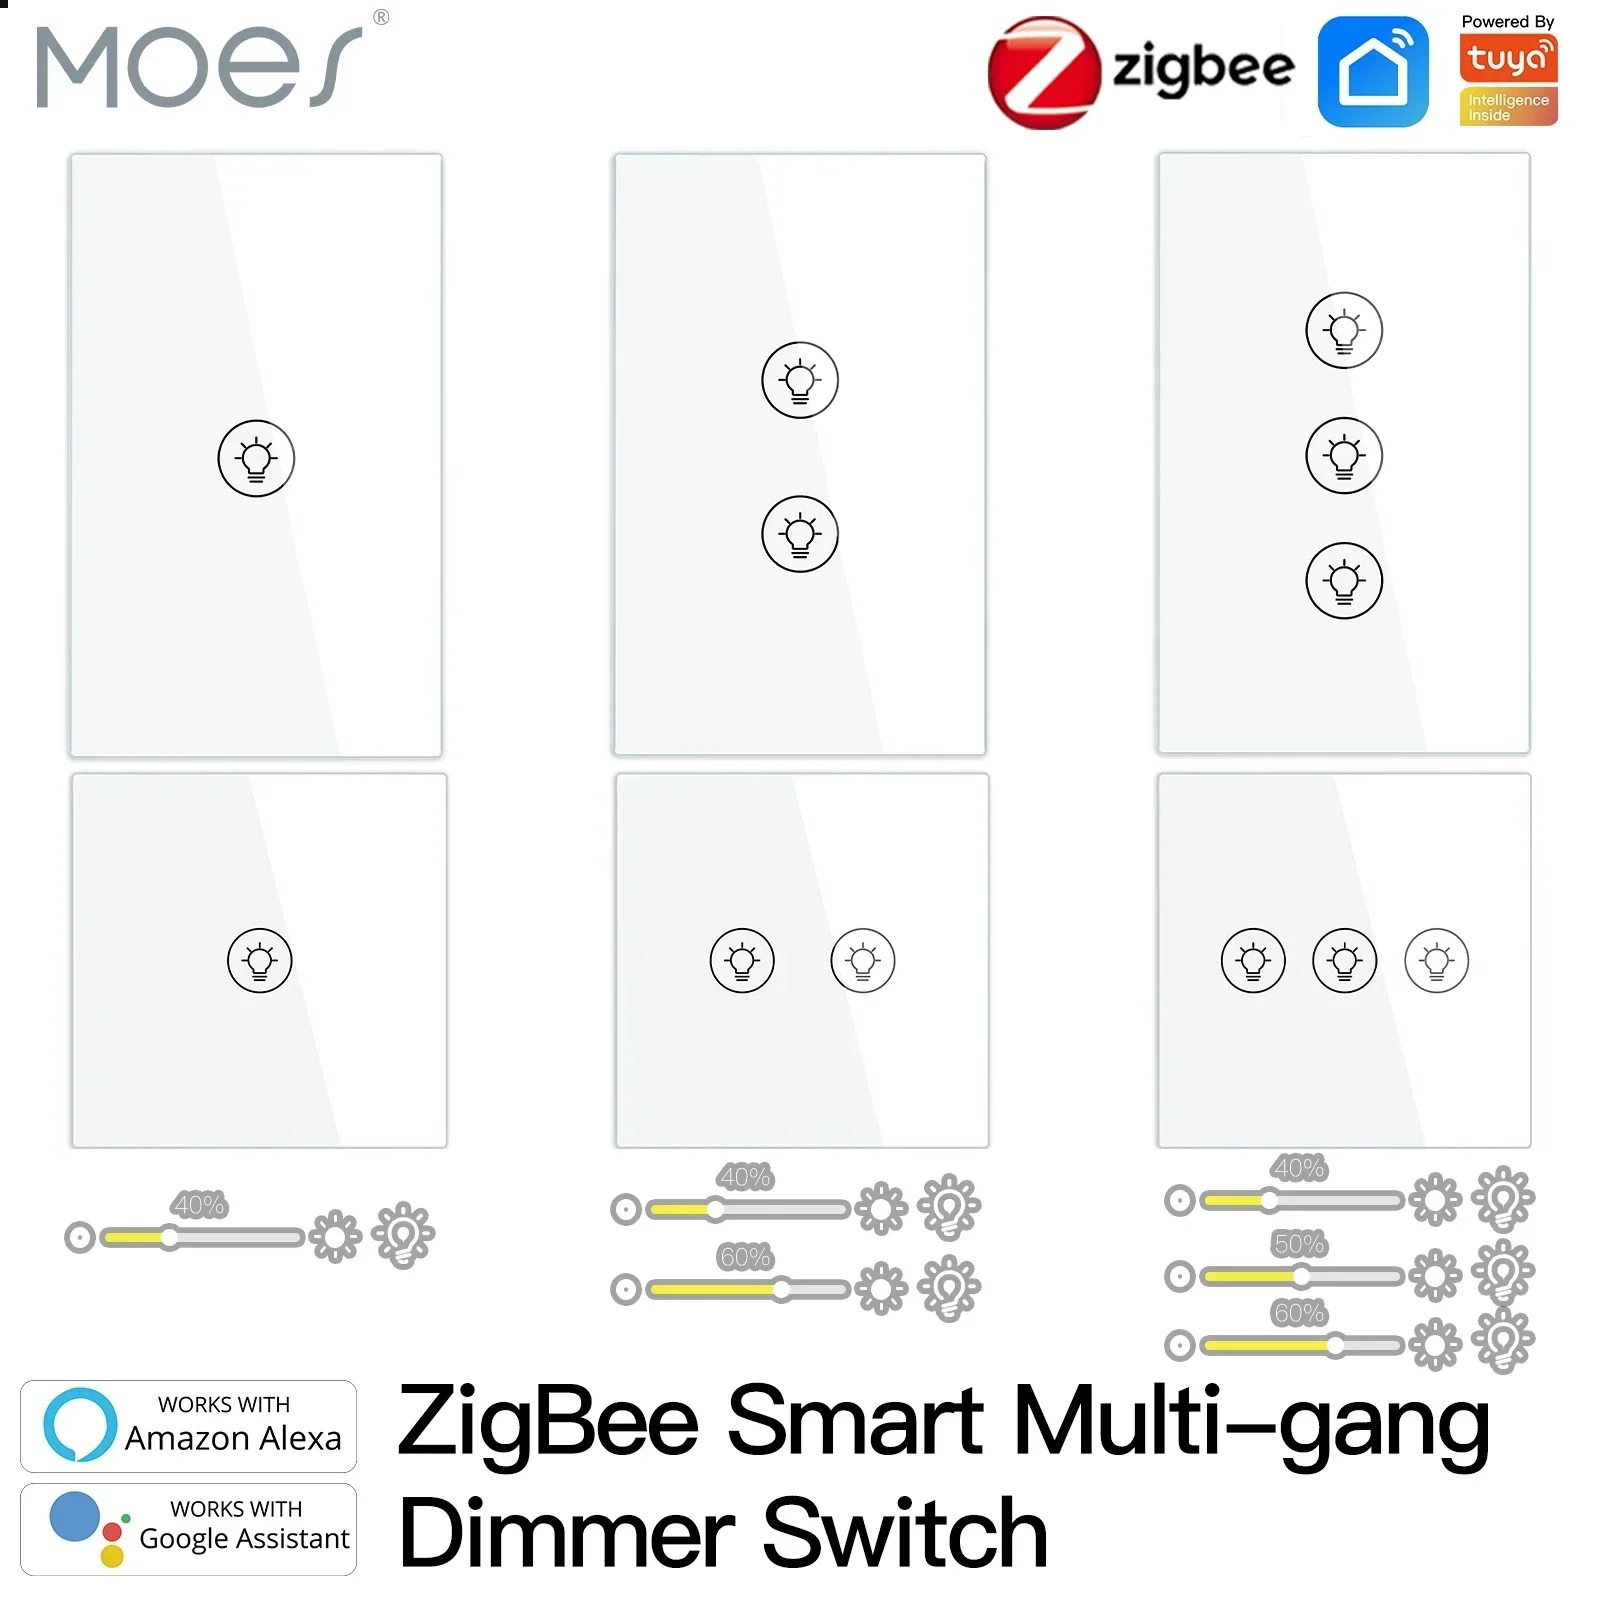 Smart ZigBee Multi-gang Light Dimmer Switch Independent Control Smart Tuya APP Control Works with Alexa Google Home 1/2/3 Gang wyze cam pan v3 security camera 1080p night vision 2 way audio motion detection for home baby pet monitor works with alexa